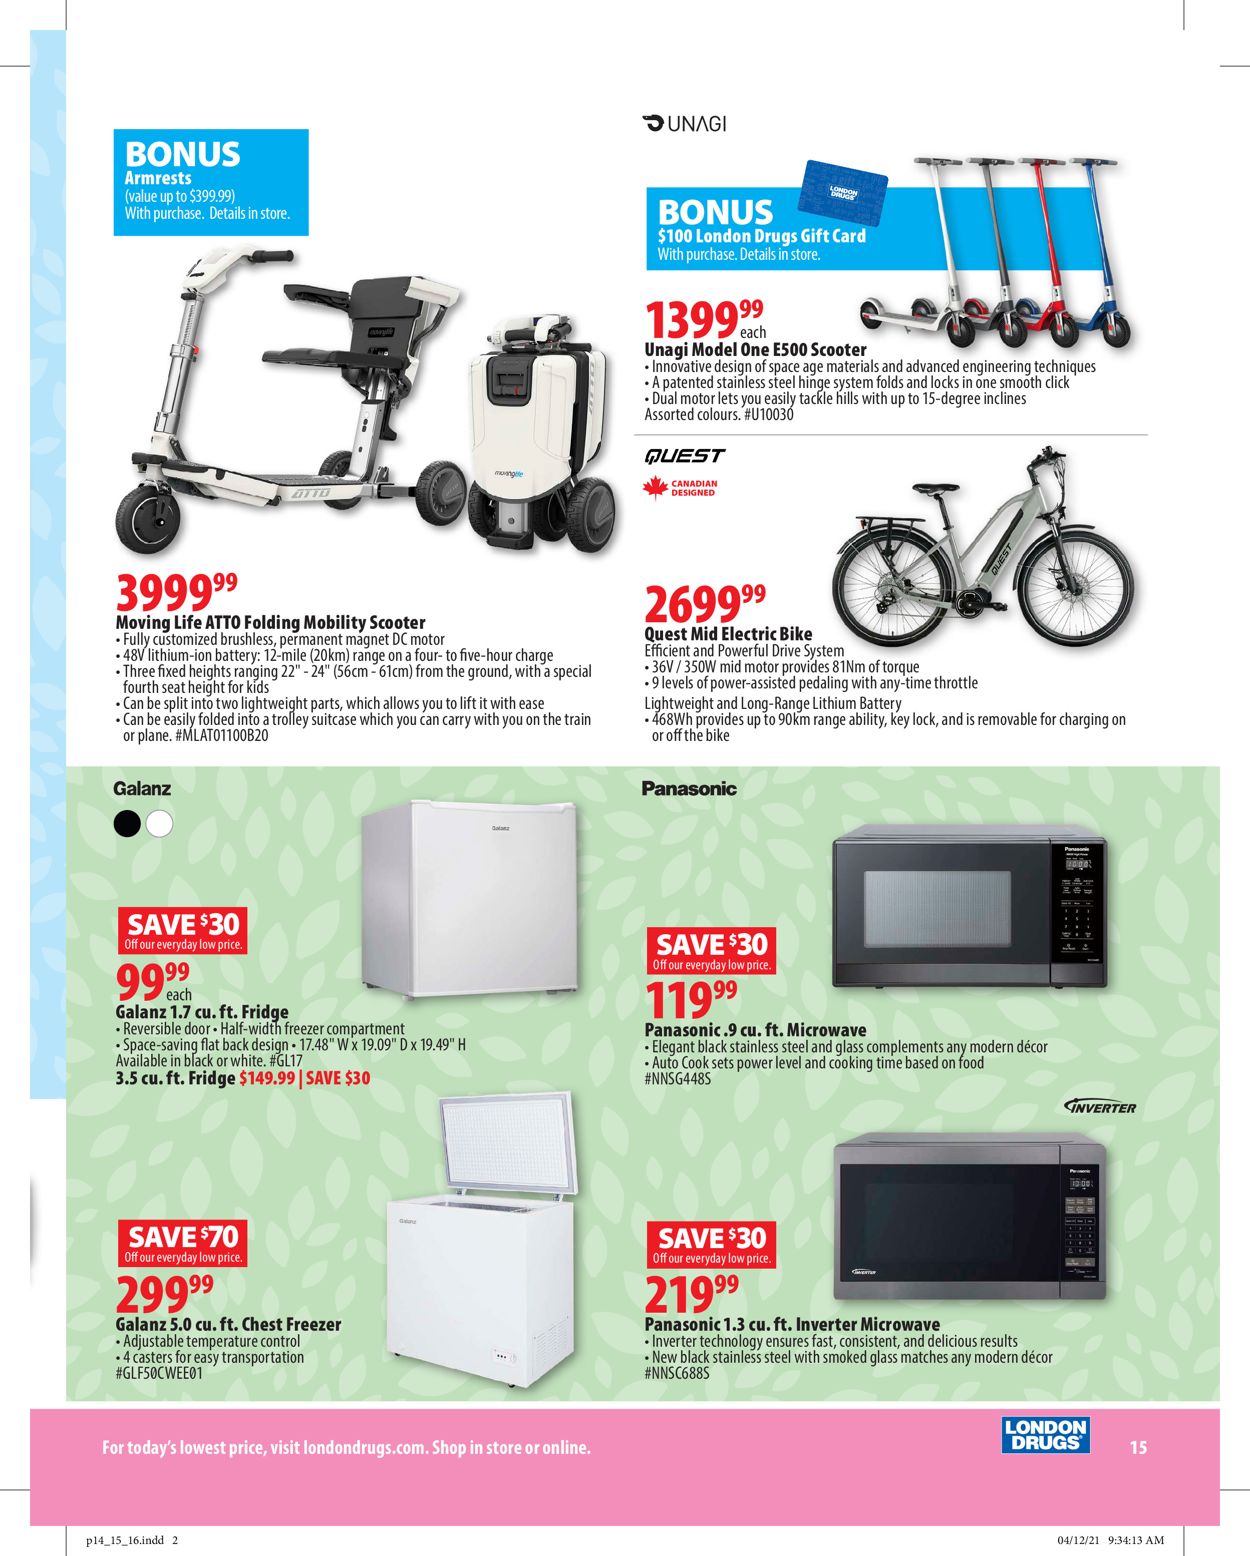 London Drugs Flyer from 04/30/2021